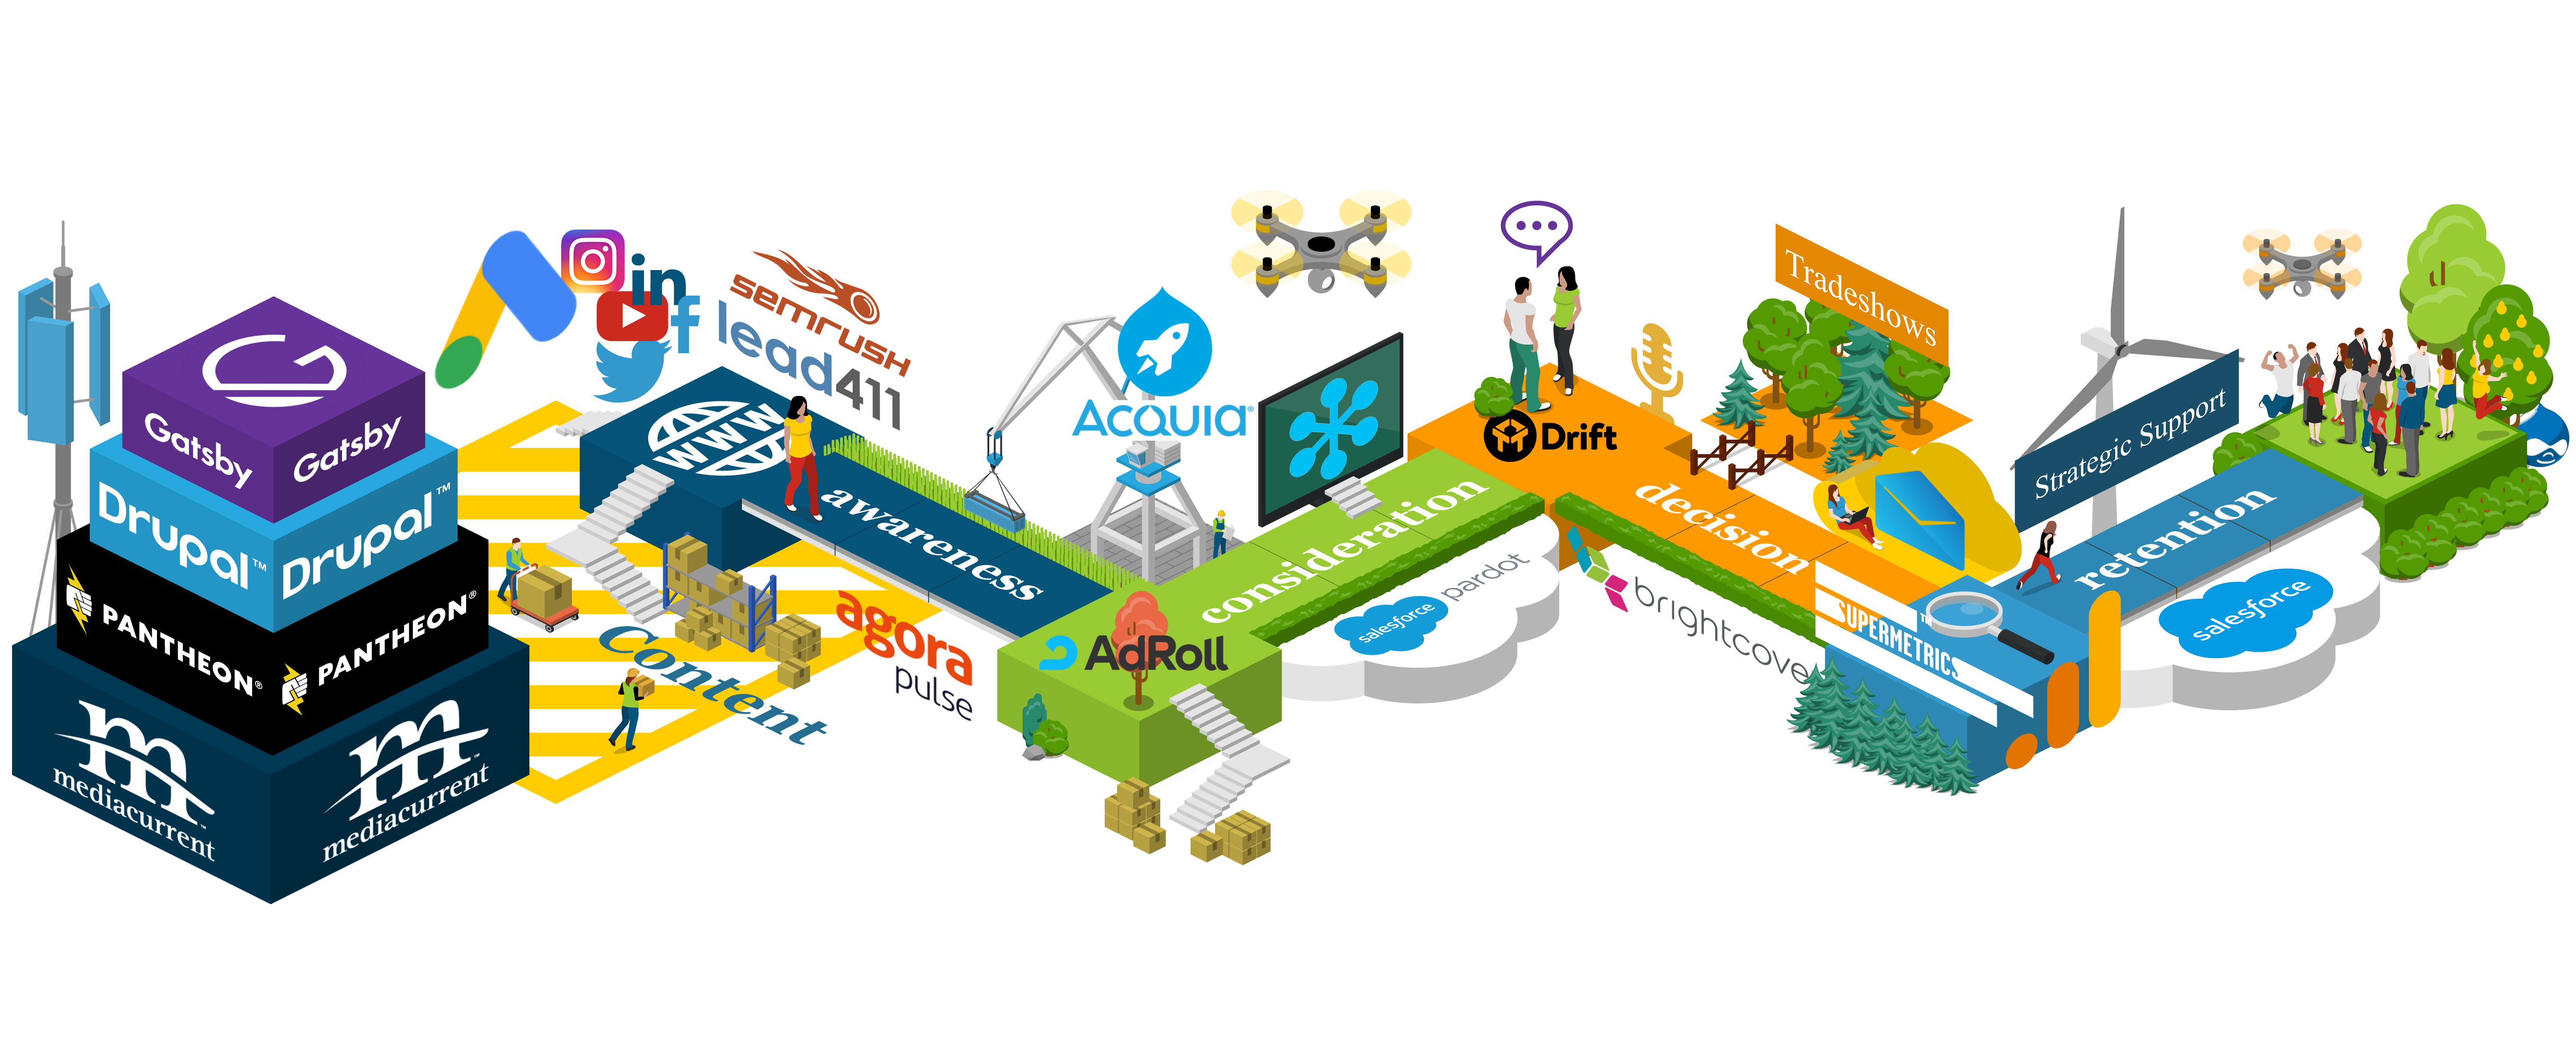 Mediacurrent's marketing technology stack visually illustrated showing contacts going down the buyer's journey and technology that aligns with each stage.